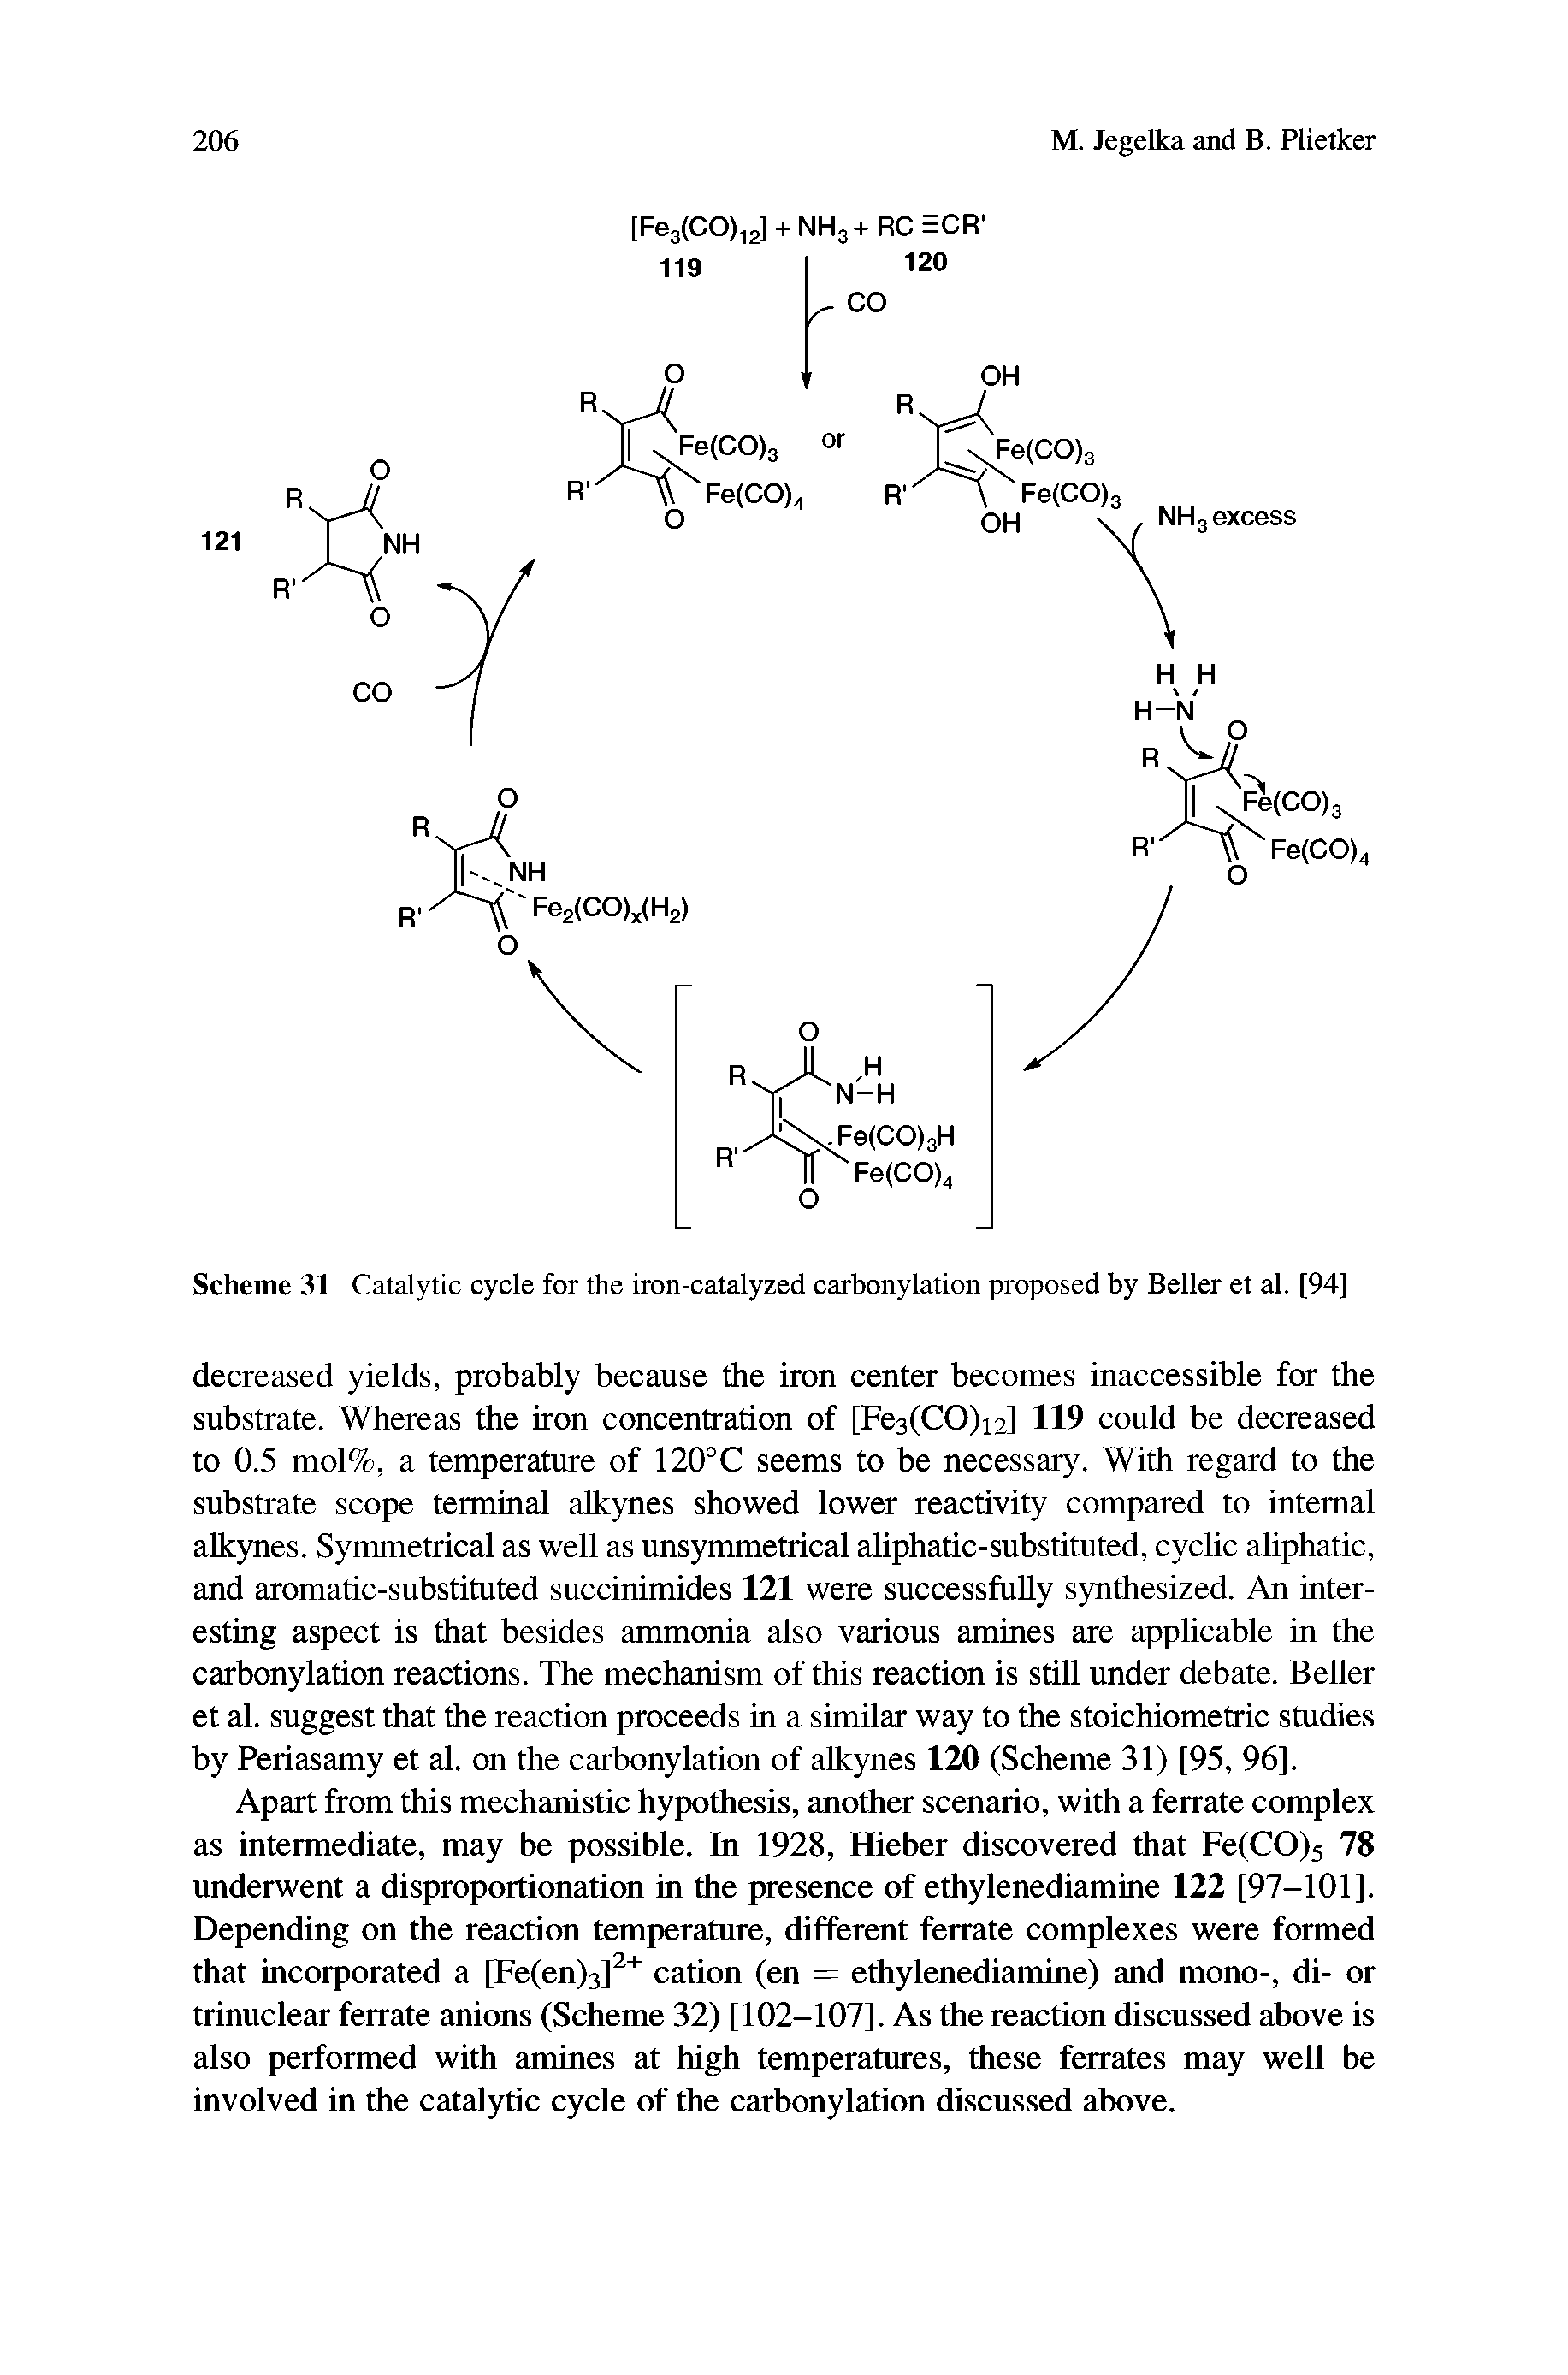 Scheme 31 Catalytic cycle for the iron-catalyzed carbonylation proposed by Seller et al. [94]...